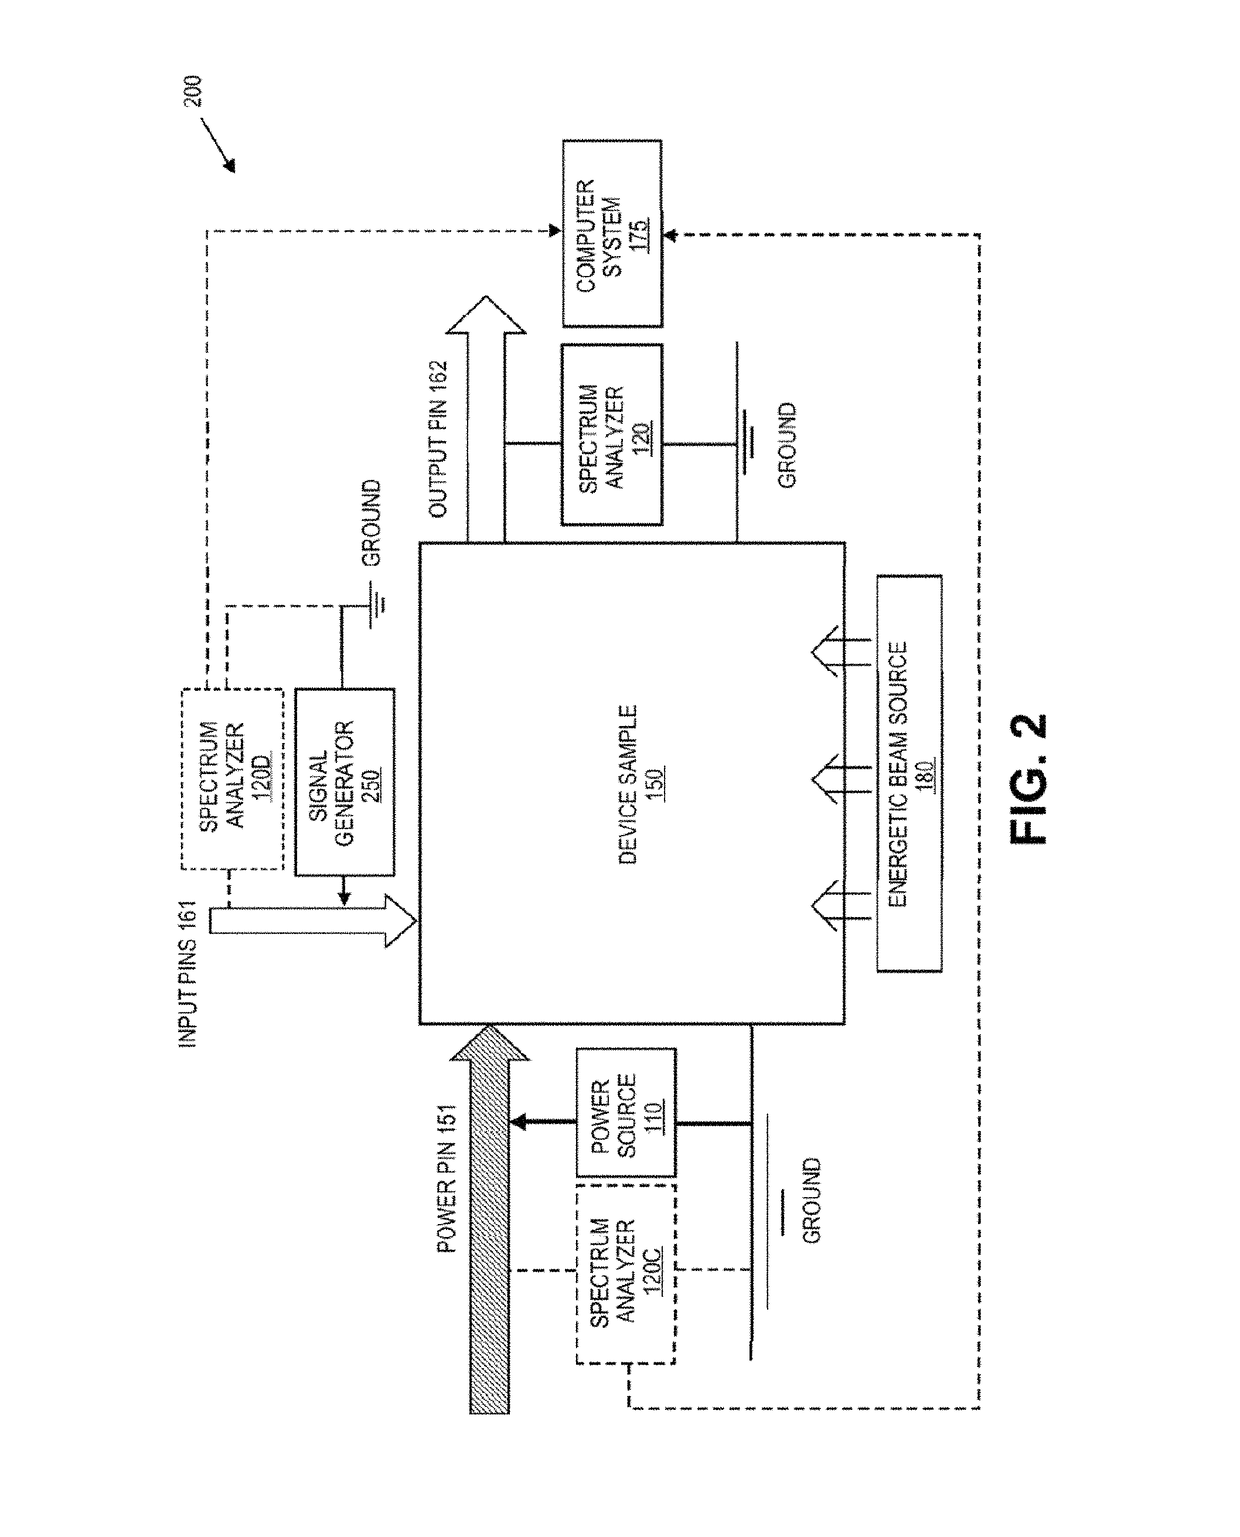 Scanning method for screening of electronic devices